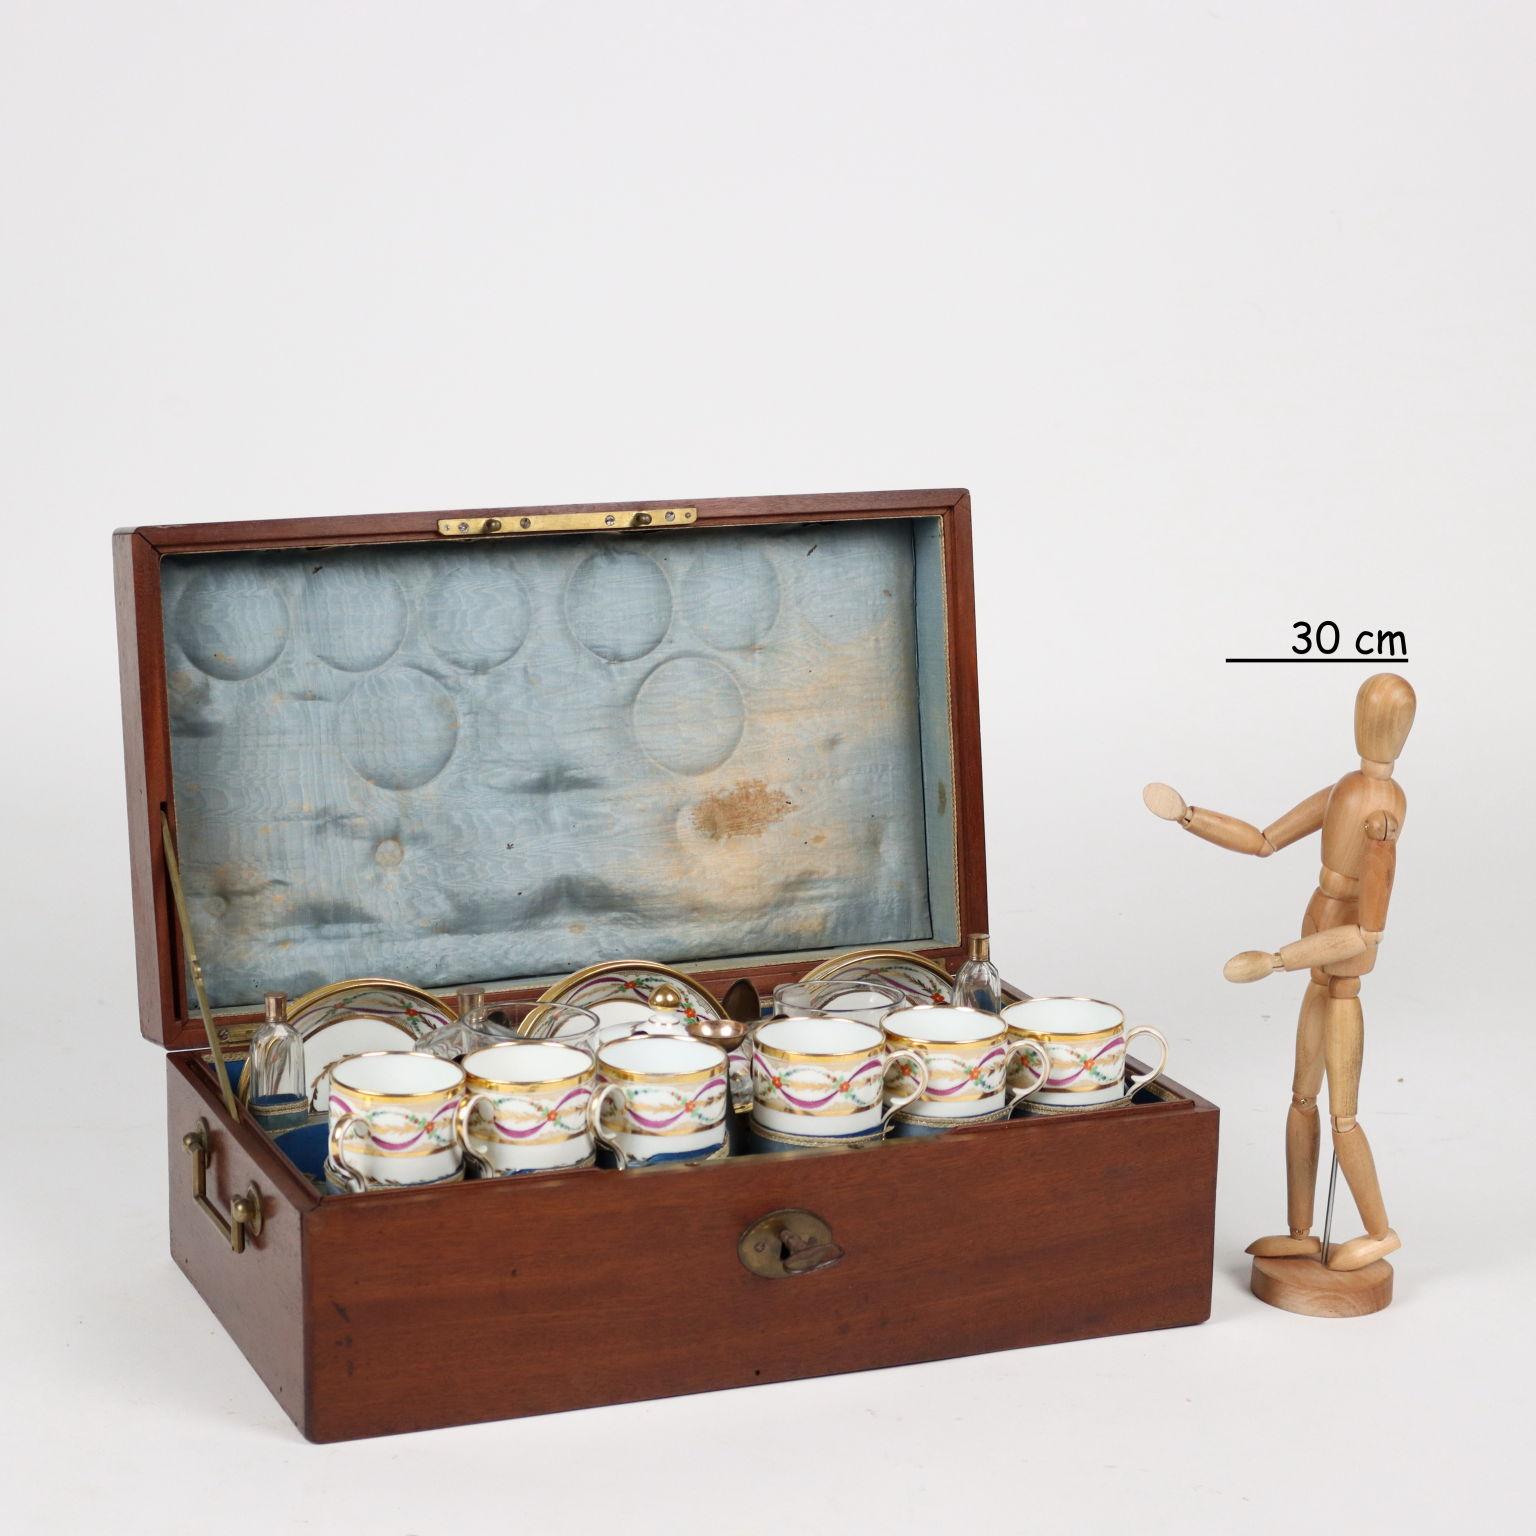 Mahogany wood trunk with brass sockets. Inside, a set in French porcelain finely decorated in pure gold and polychrome with ribbons and garlands of flowers. Service consisting of six teacups with saucers and sugar bowl. Missing teapot and milk jug.